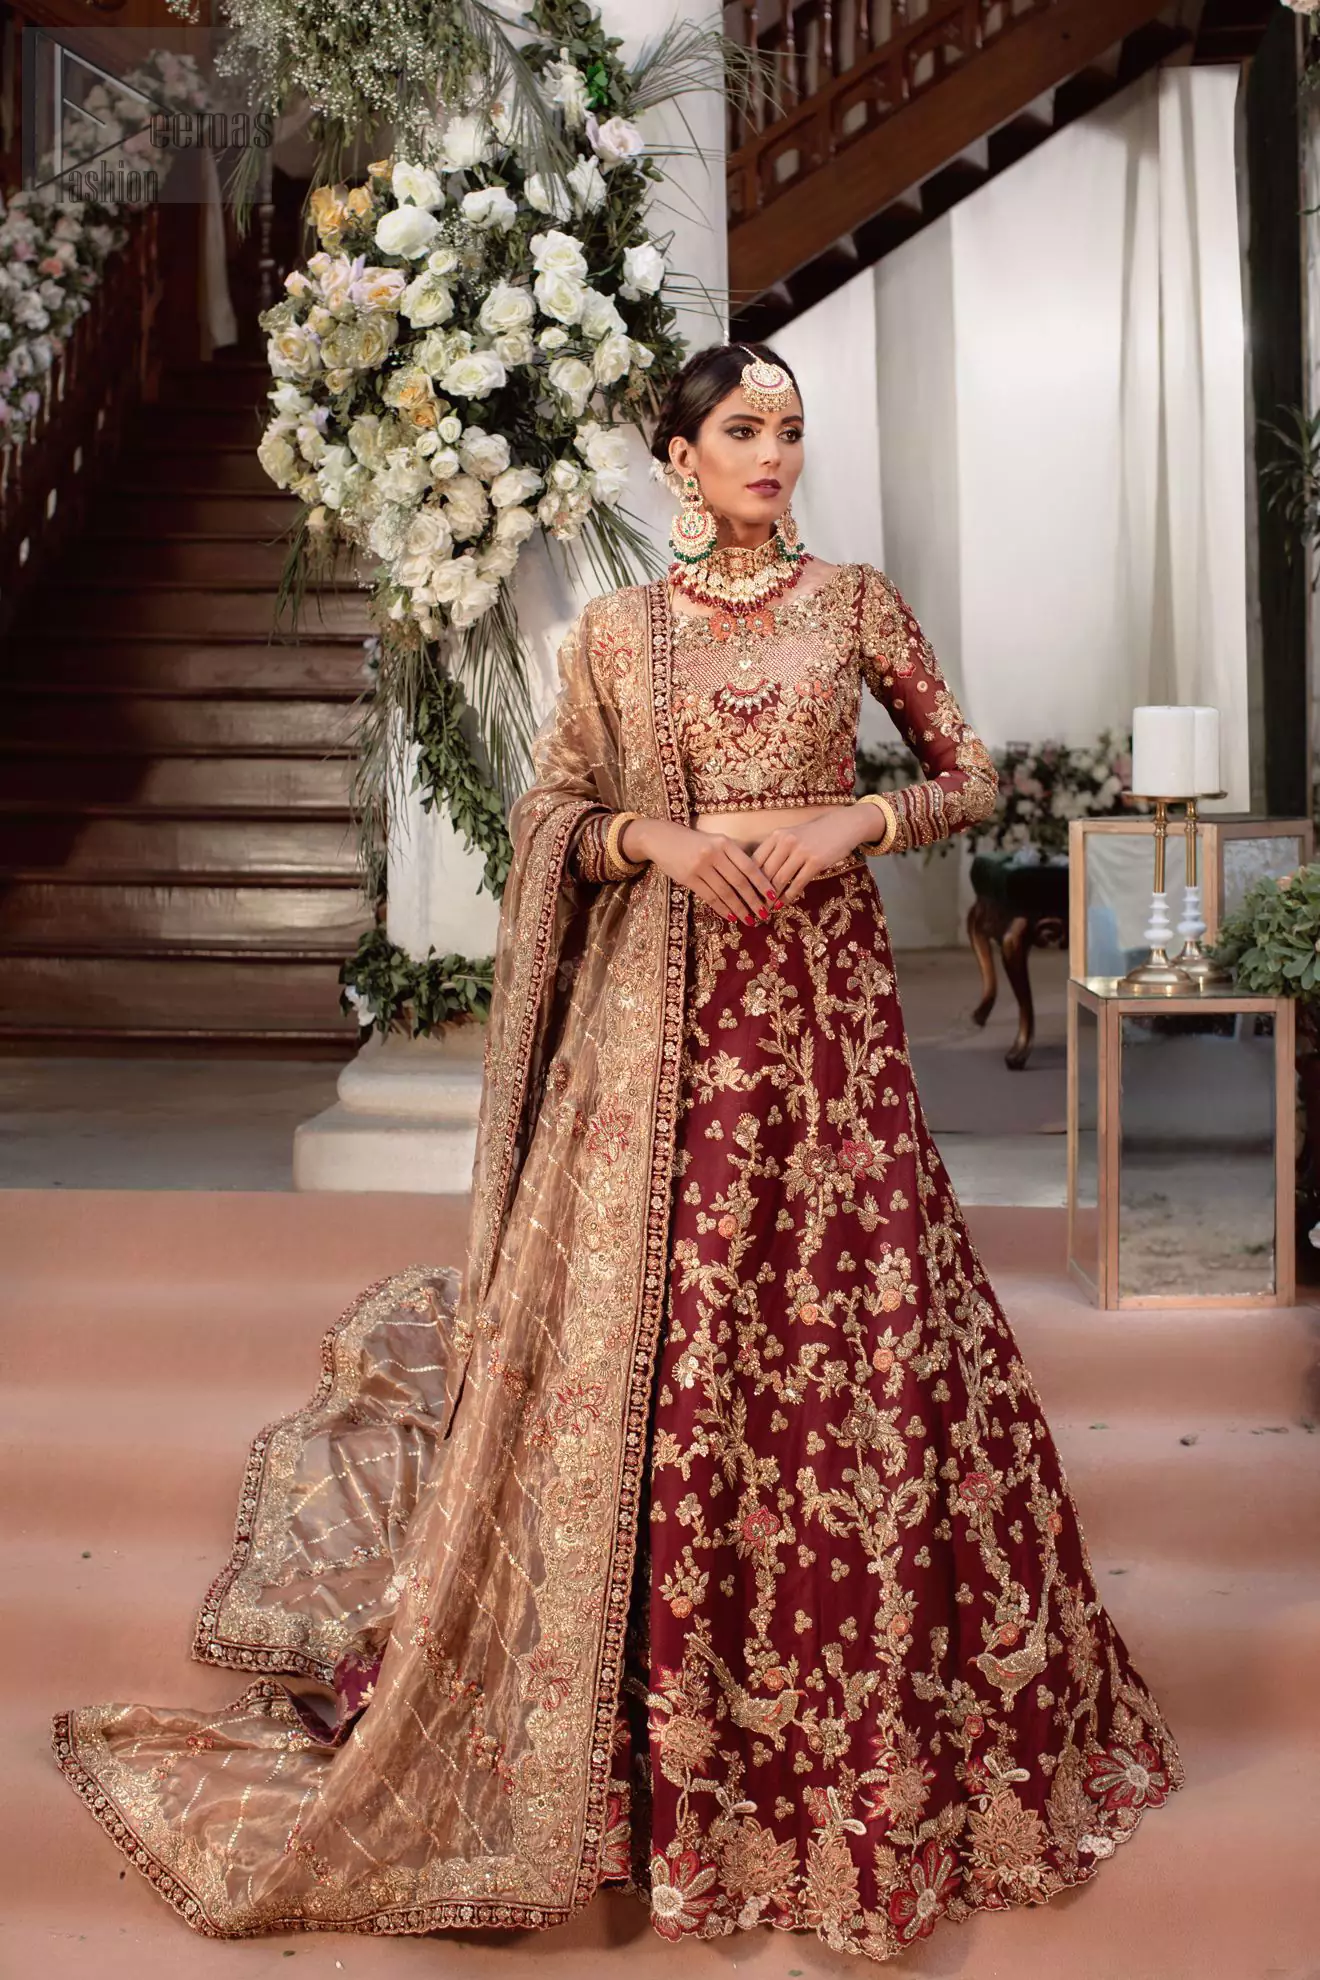 Enriched with utmost grandiose, and formed in perfection, the full-sleeved Maroon Lehenga Blouse is definitely a traditional beauty.